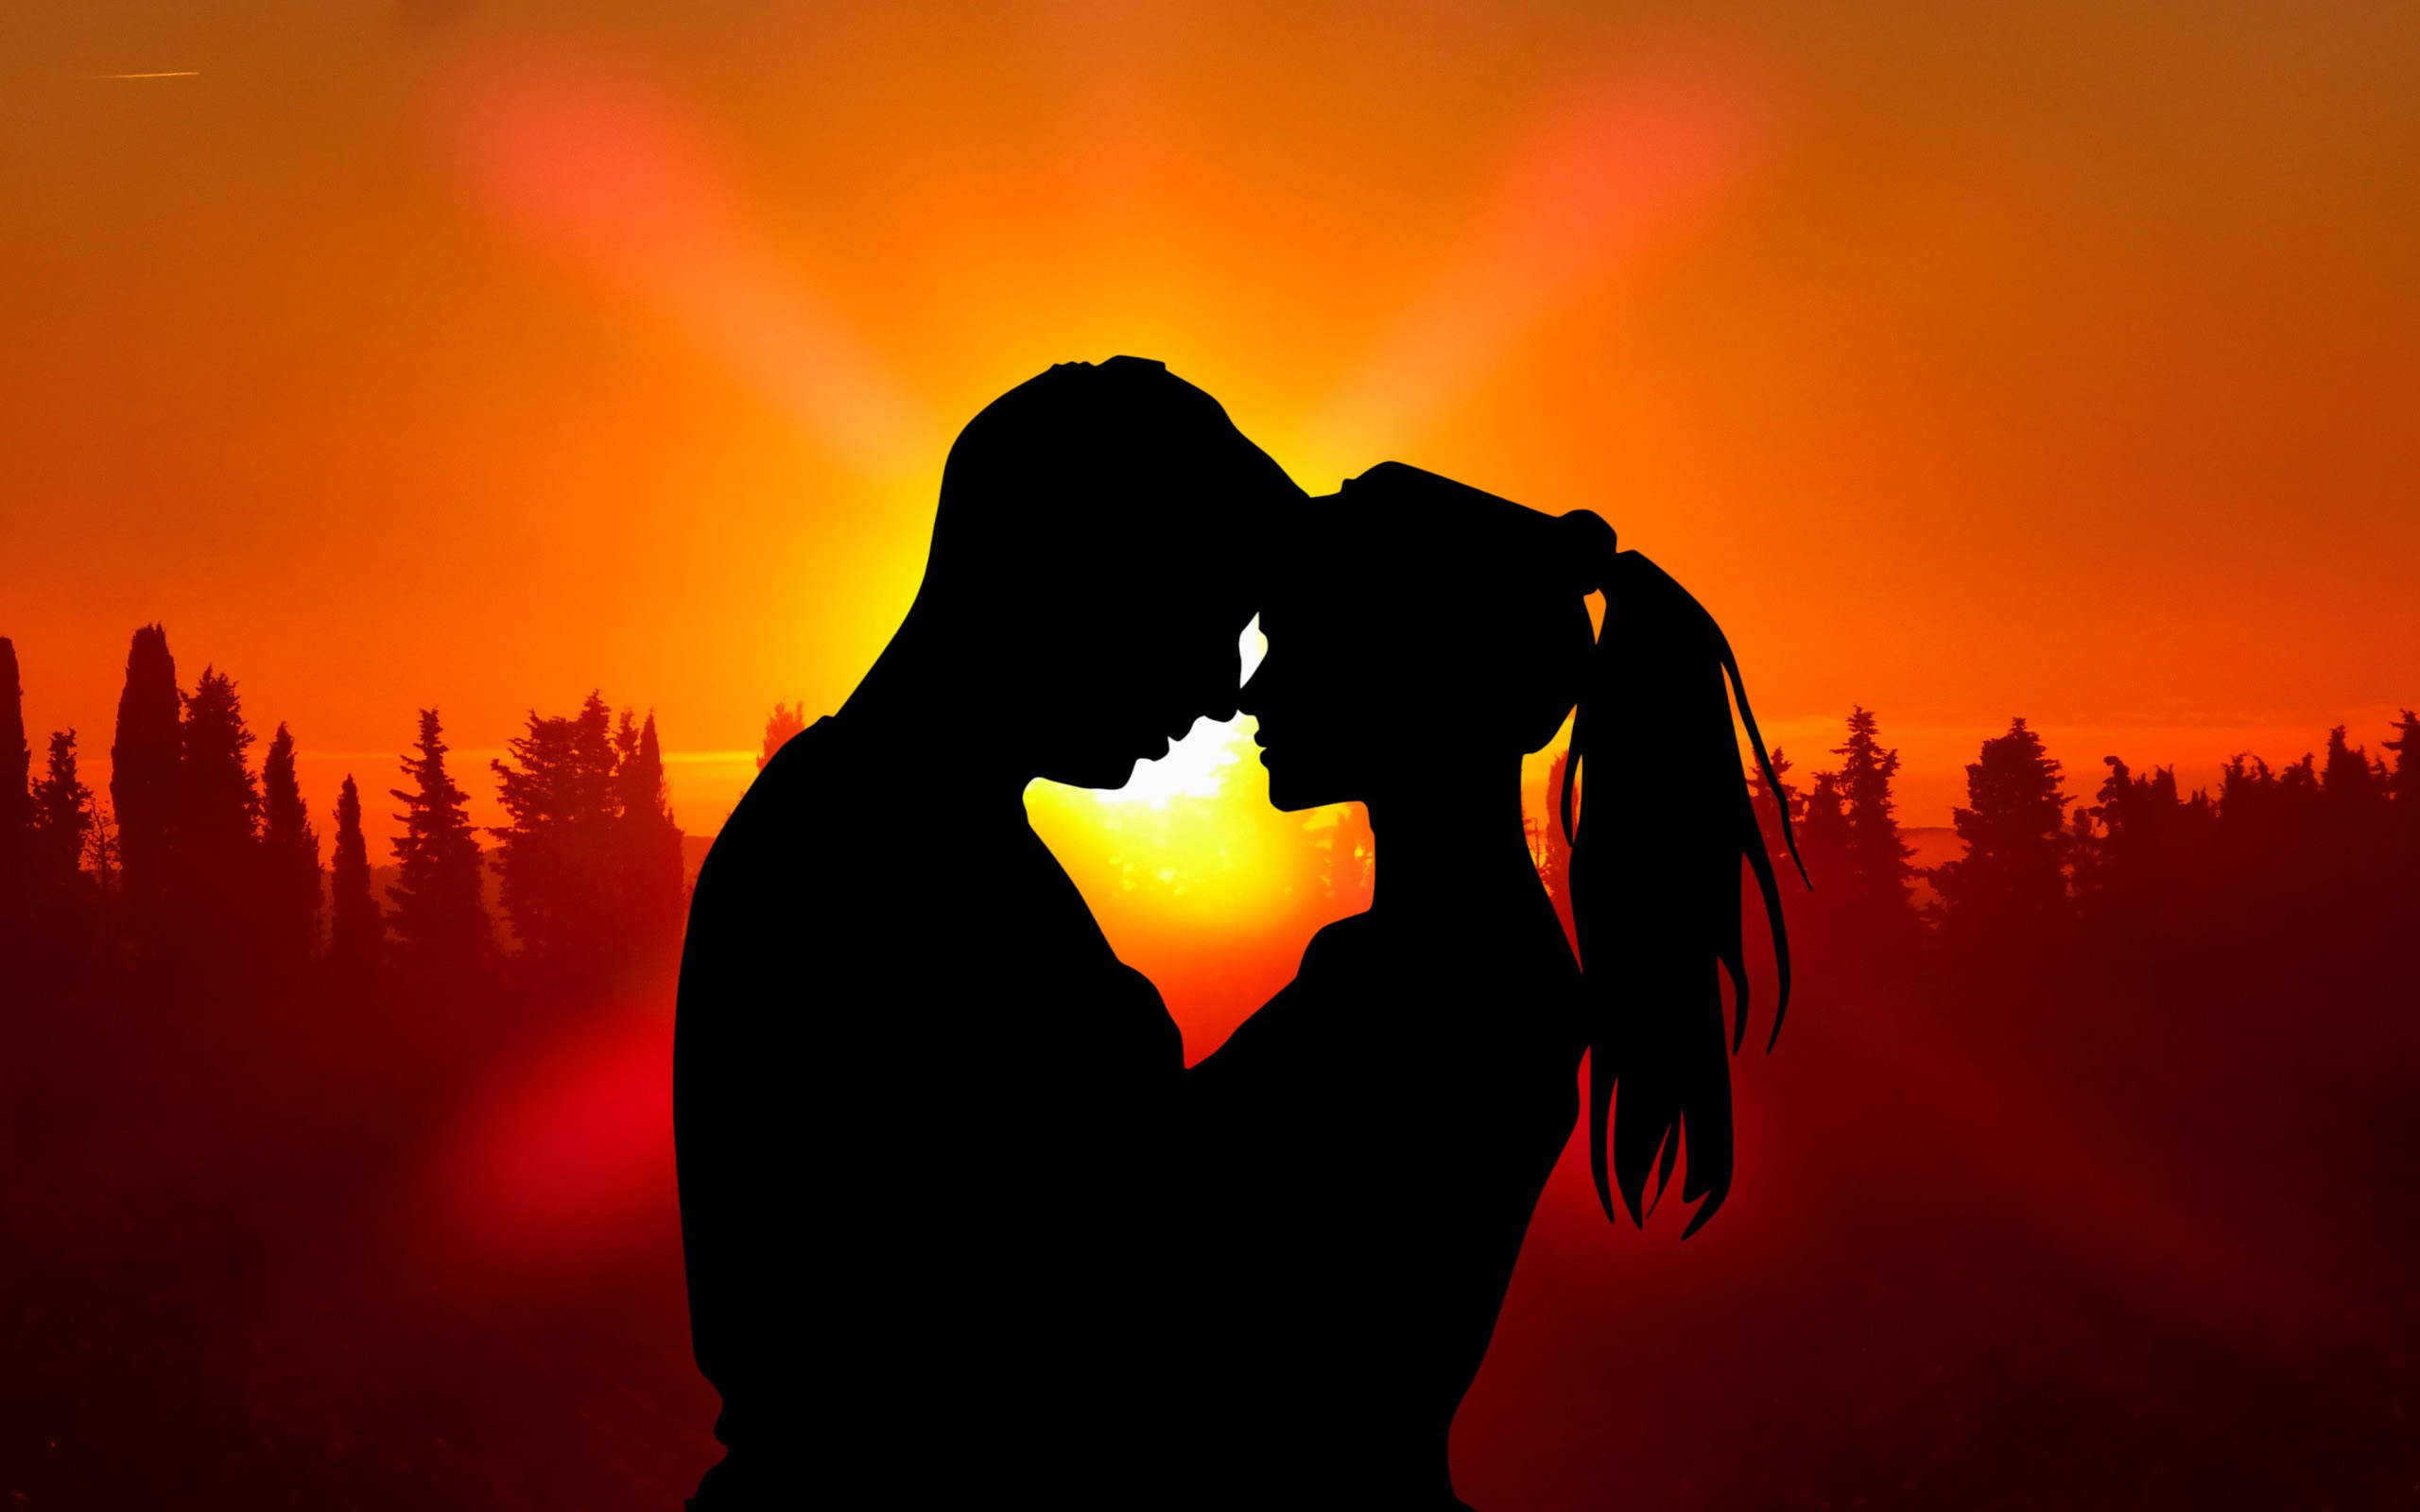 Sunset Boy and Girl Silhouette romantic couple love Wallpaper Hd